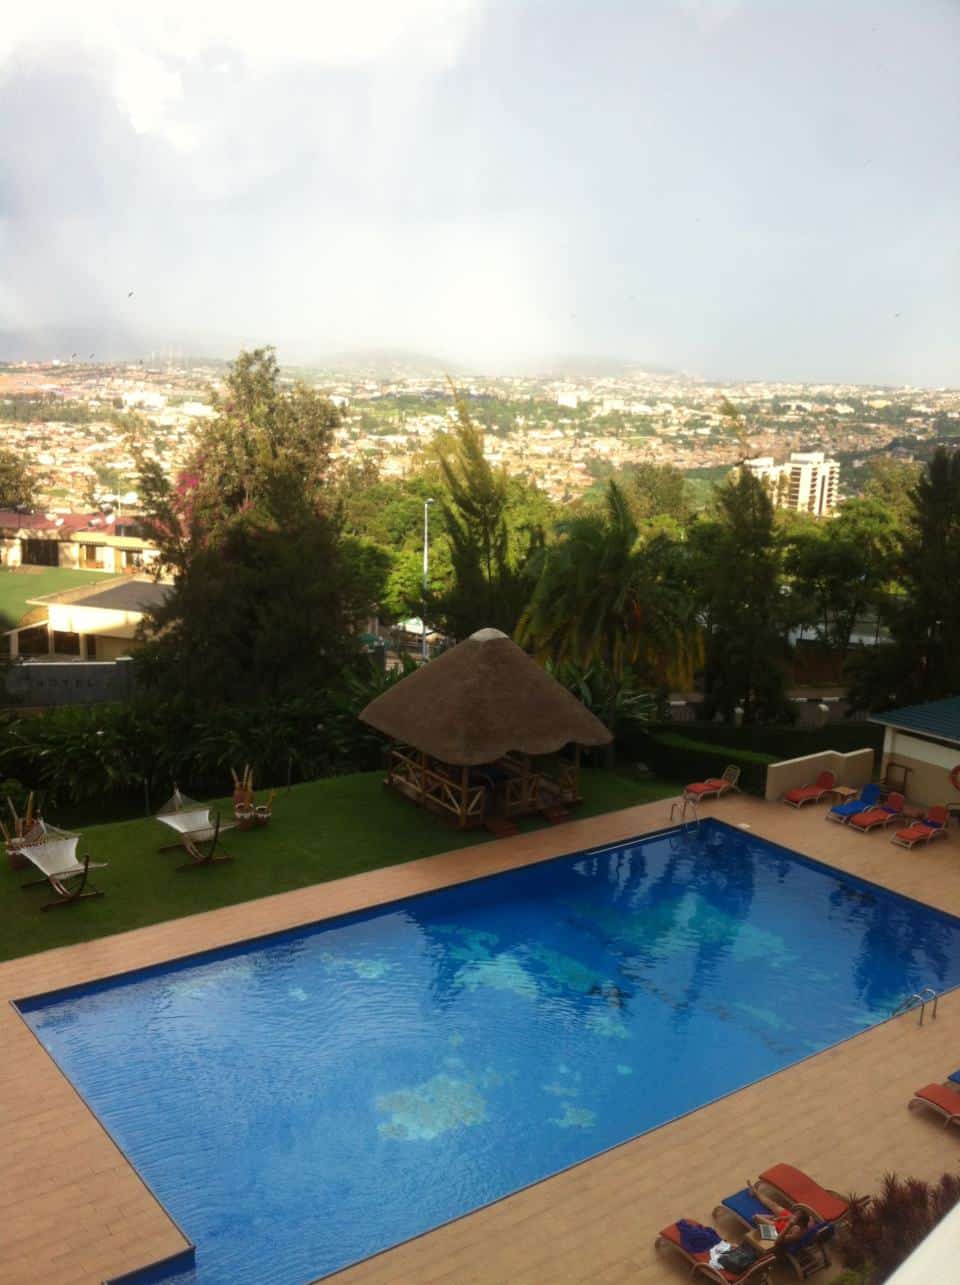 Best Things to Do in Kigali – Our 24 hours in Kigali Rwanda